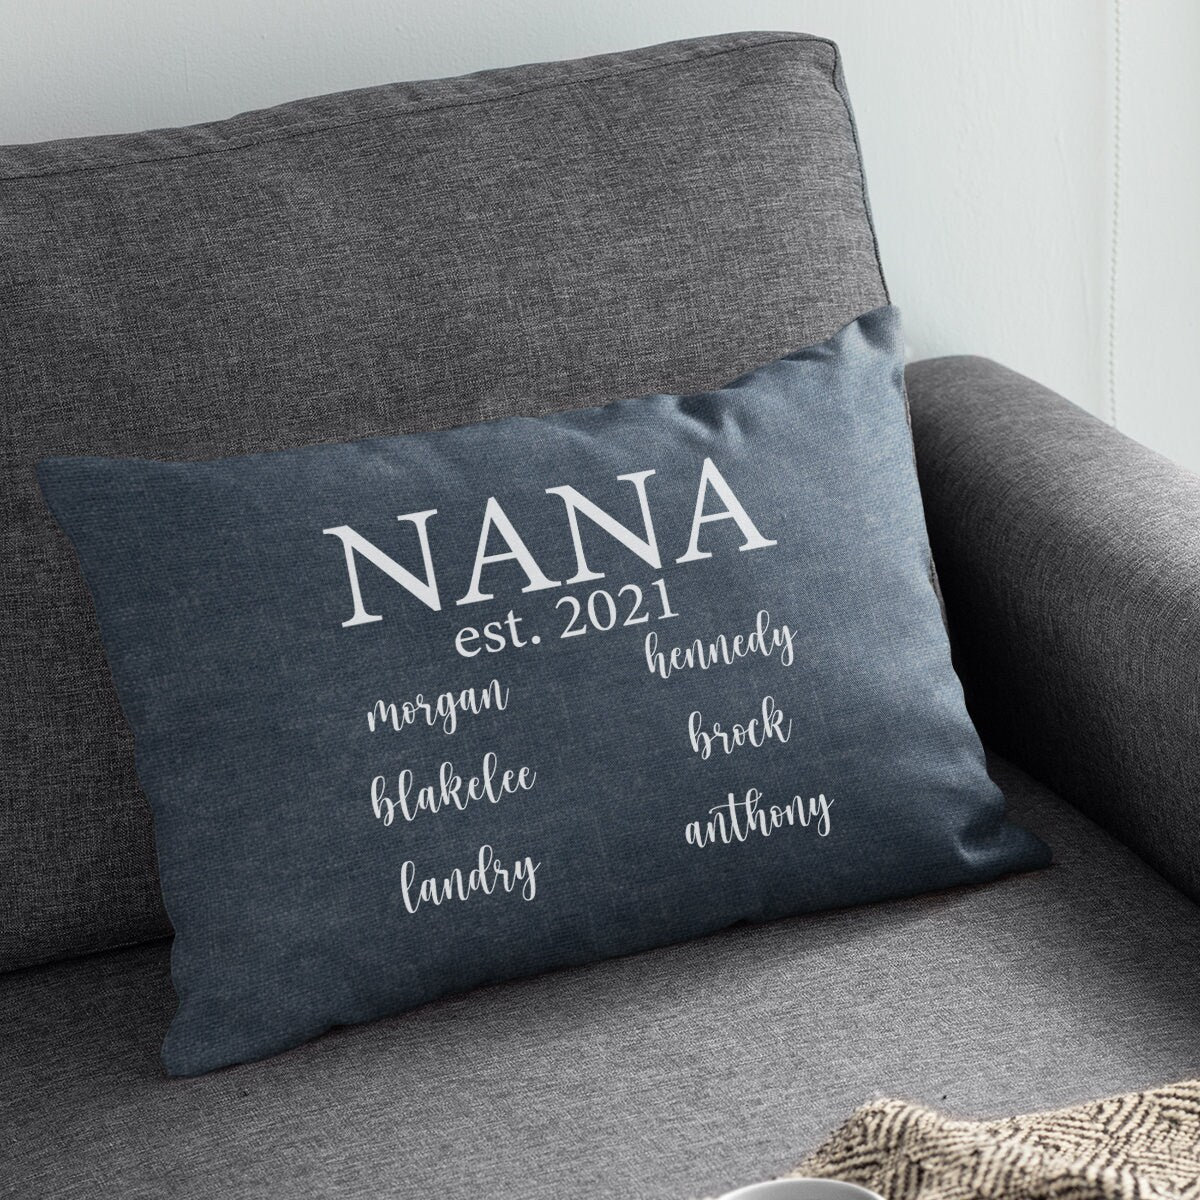 Nana Mothers Day Pillow, Grandma Pillow Covers, Nana Gift, Gift For Grandma, Grandmother Gift, Personalize Pillow, Gift From Grand Kids - Arria Home